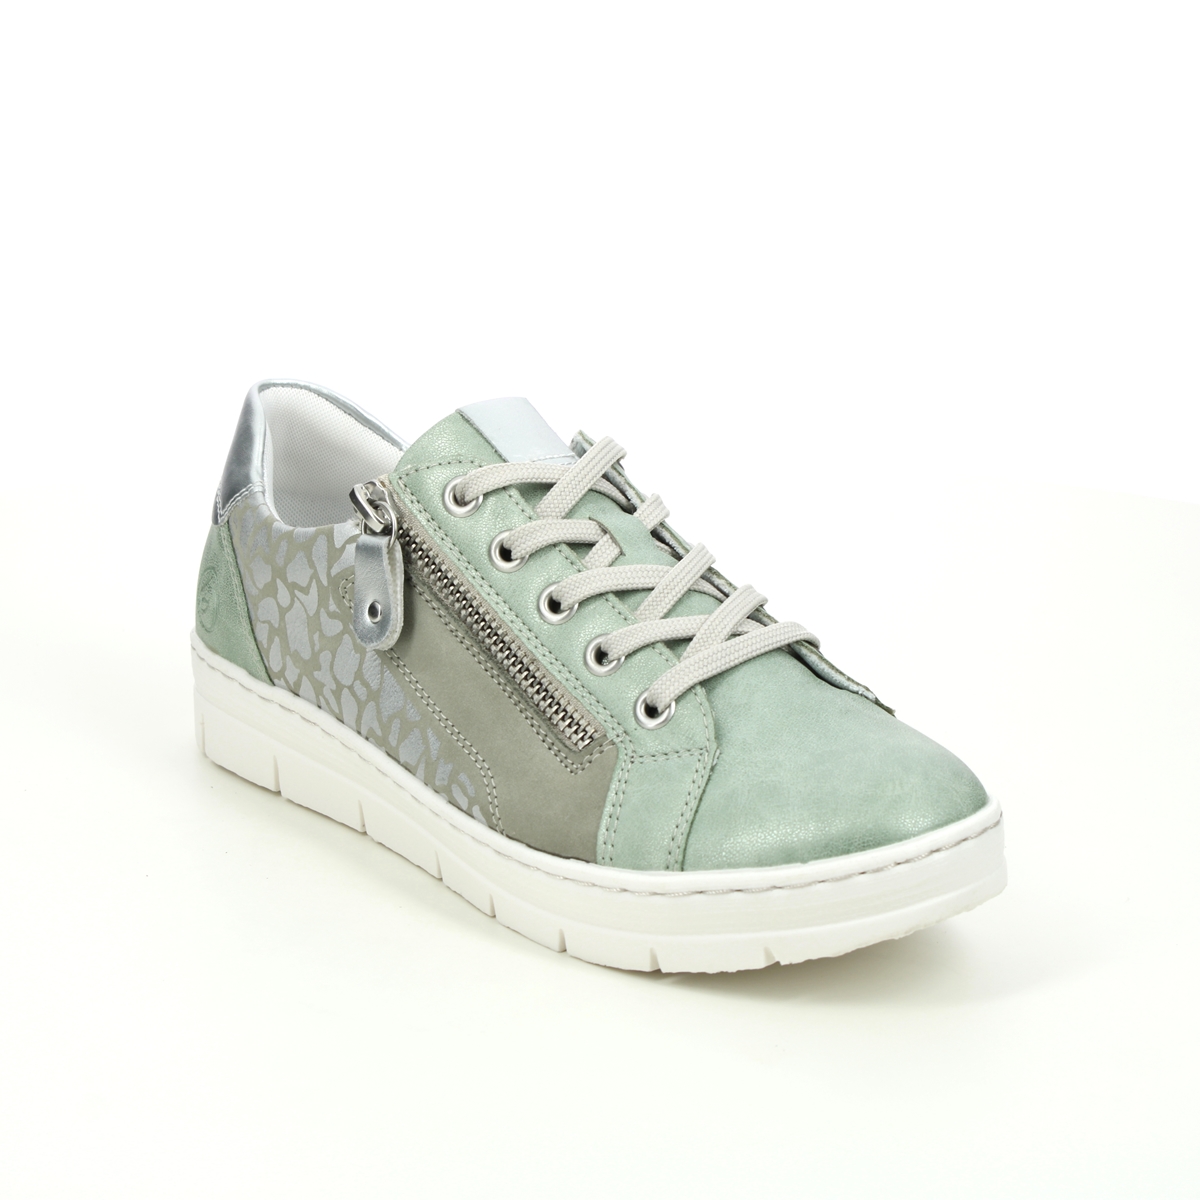 Remonte Ravenna 11 Mint Green Womens Trainers D5821-52 In Size 41 In Plain Mint Green